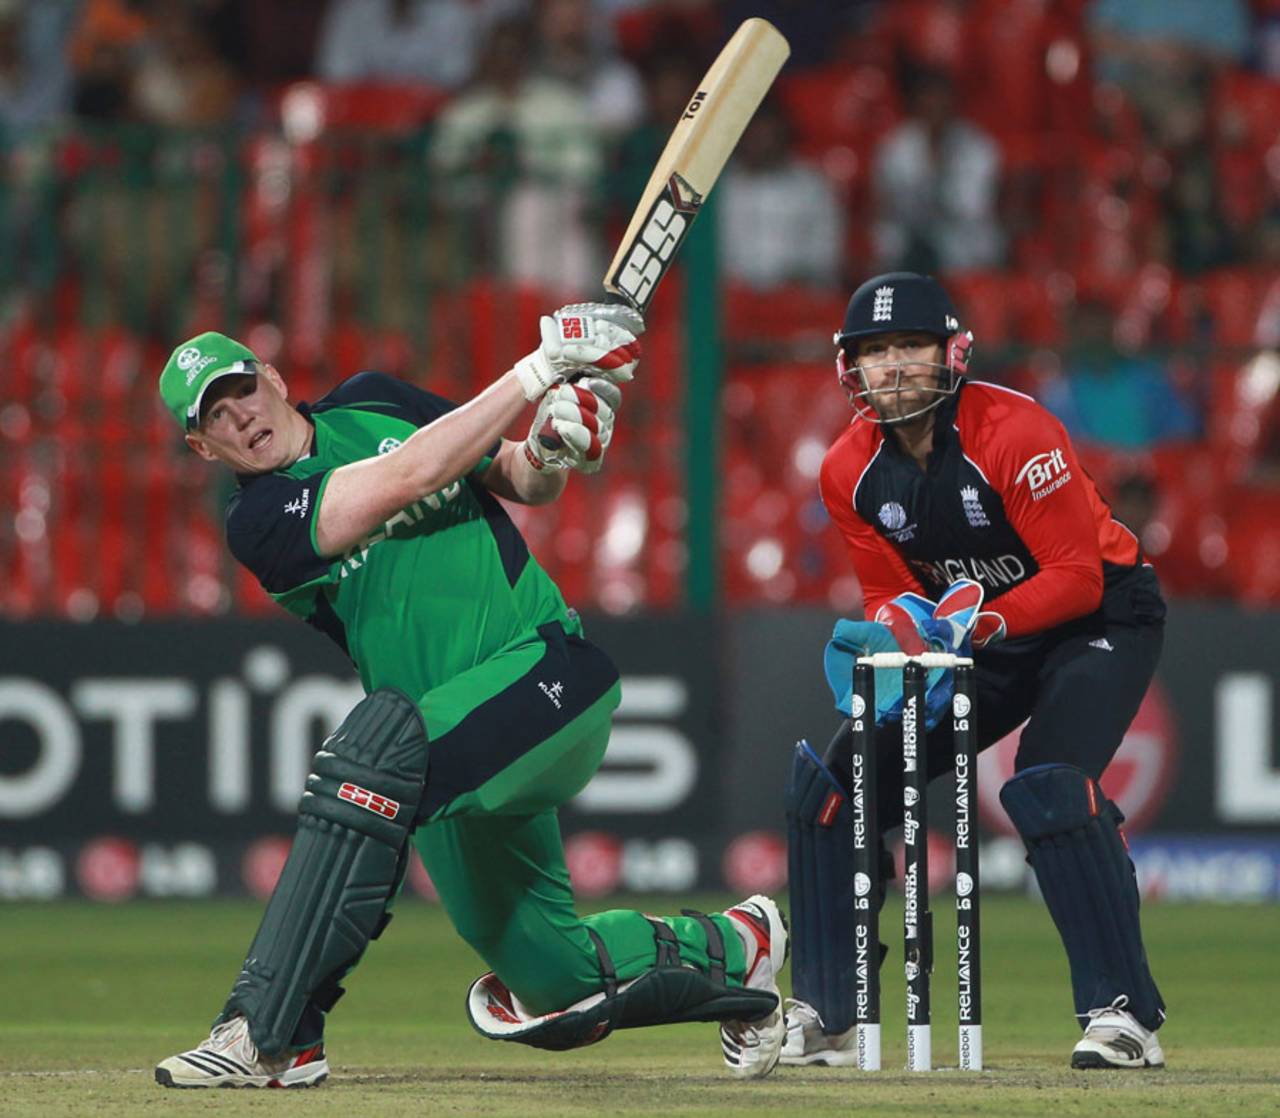 Kevin O'Brien landed some huge sixes to keep Ireland fighting, England v Ireland, World Cup 2011, Bangalore, March 2, 2011